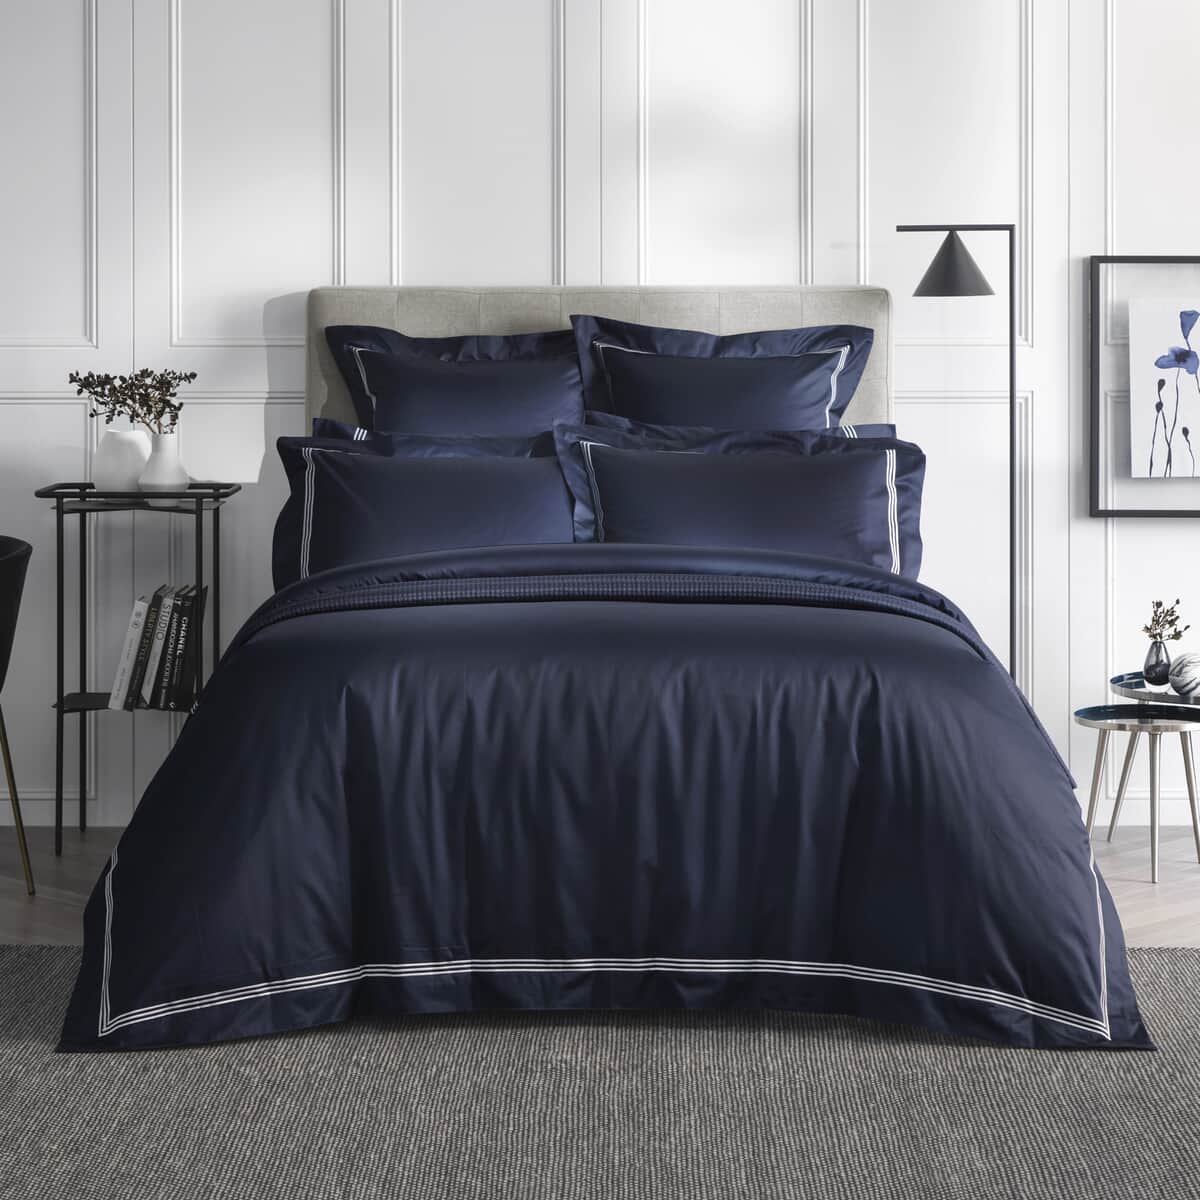 Sheridan Deluxe Palais Lux Midnight large